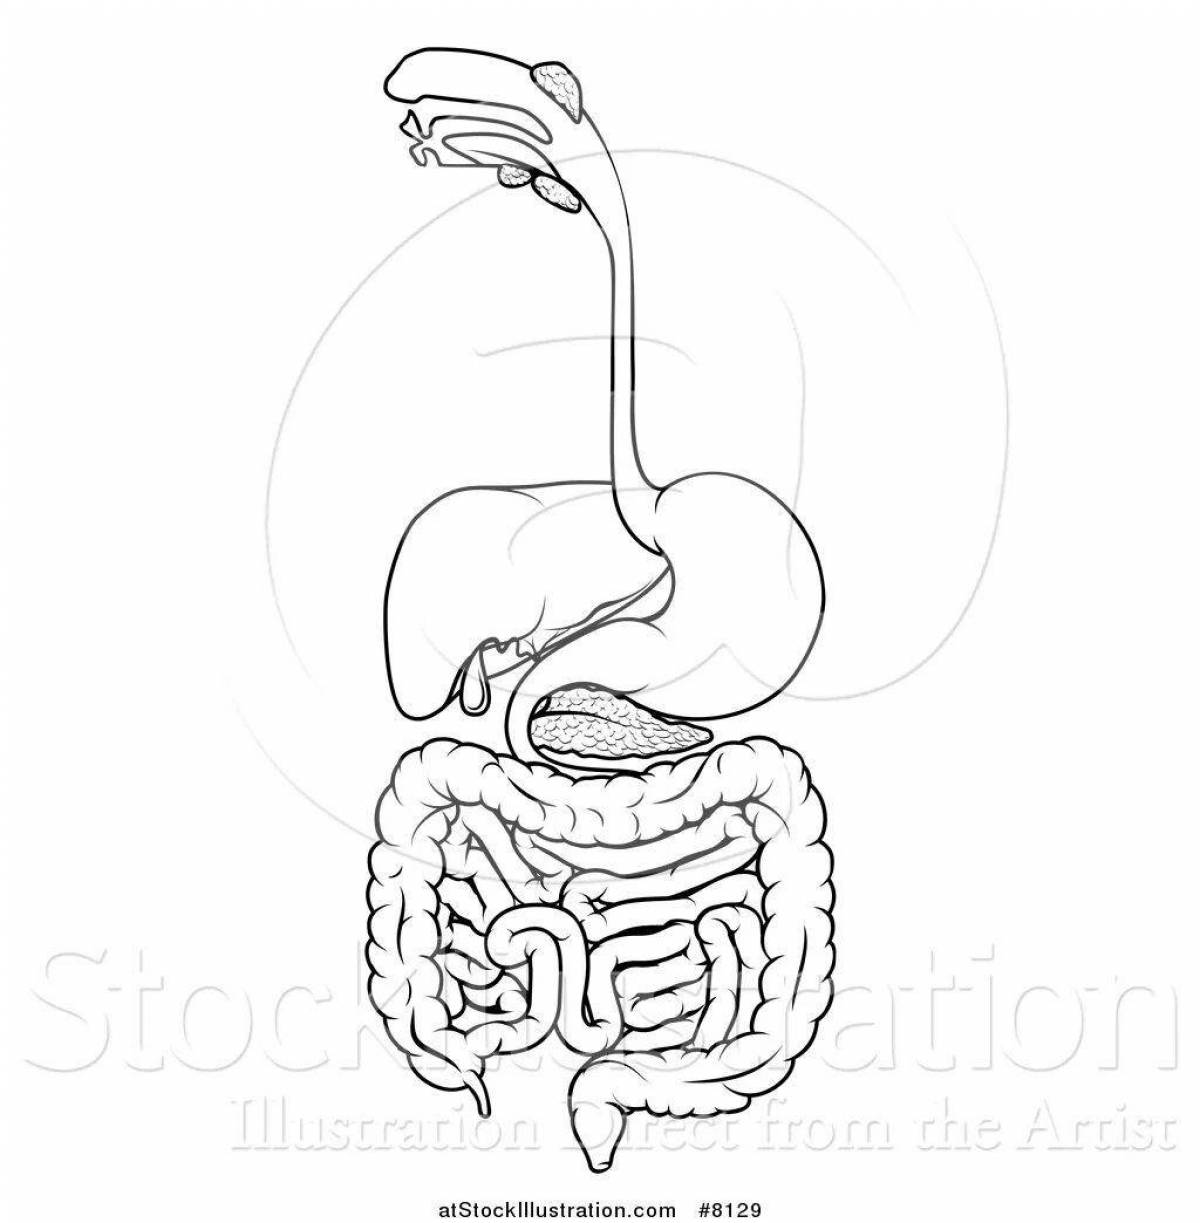 Coloring of the glorious digestive system